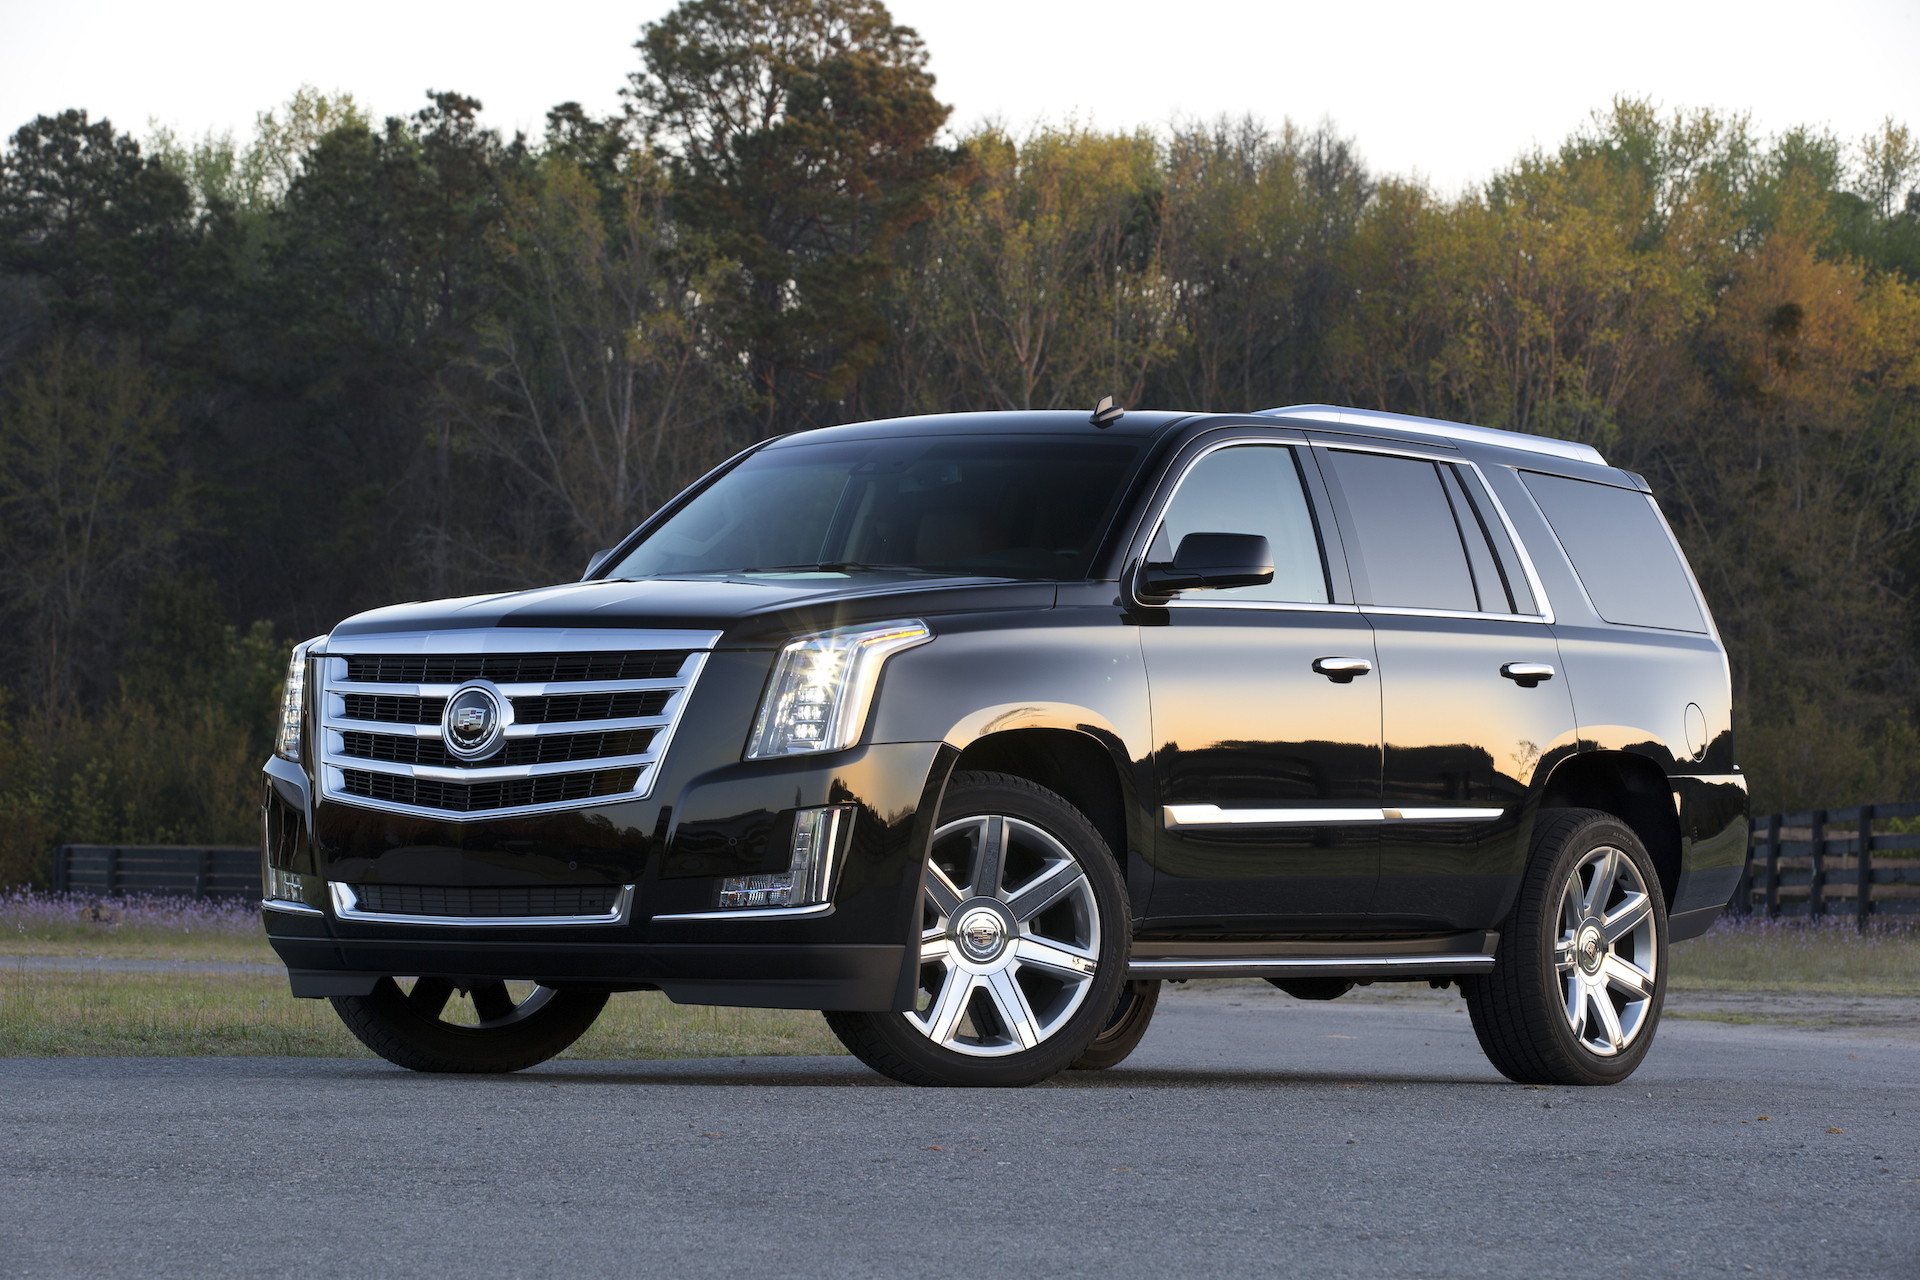 1920x1280 2015 Cadillac Escalade Wallpapers For Laptops